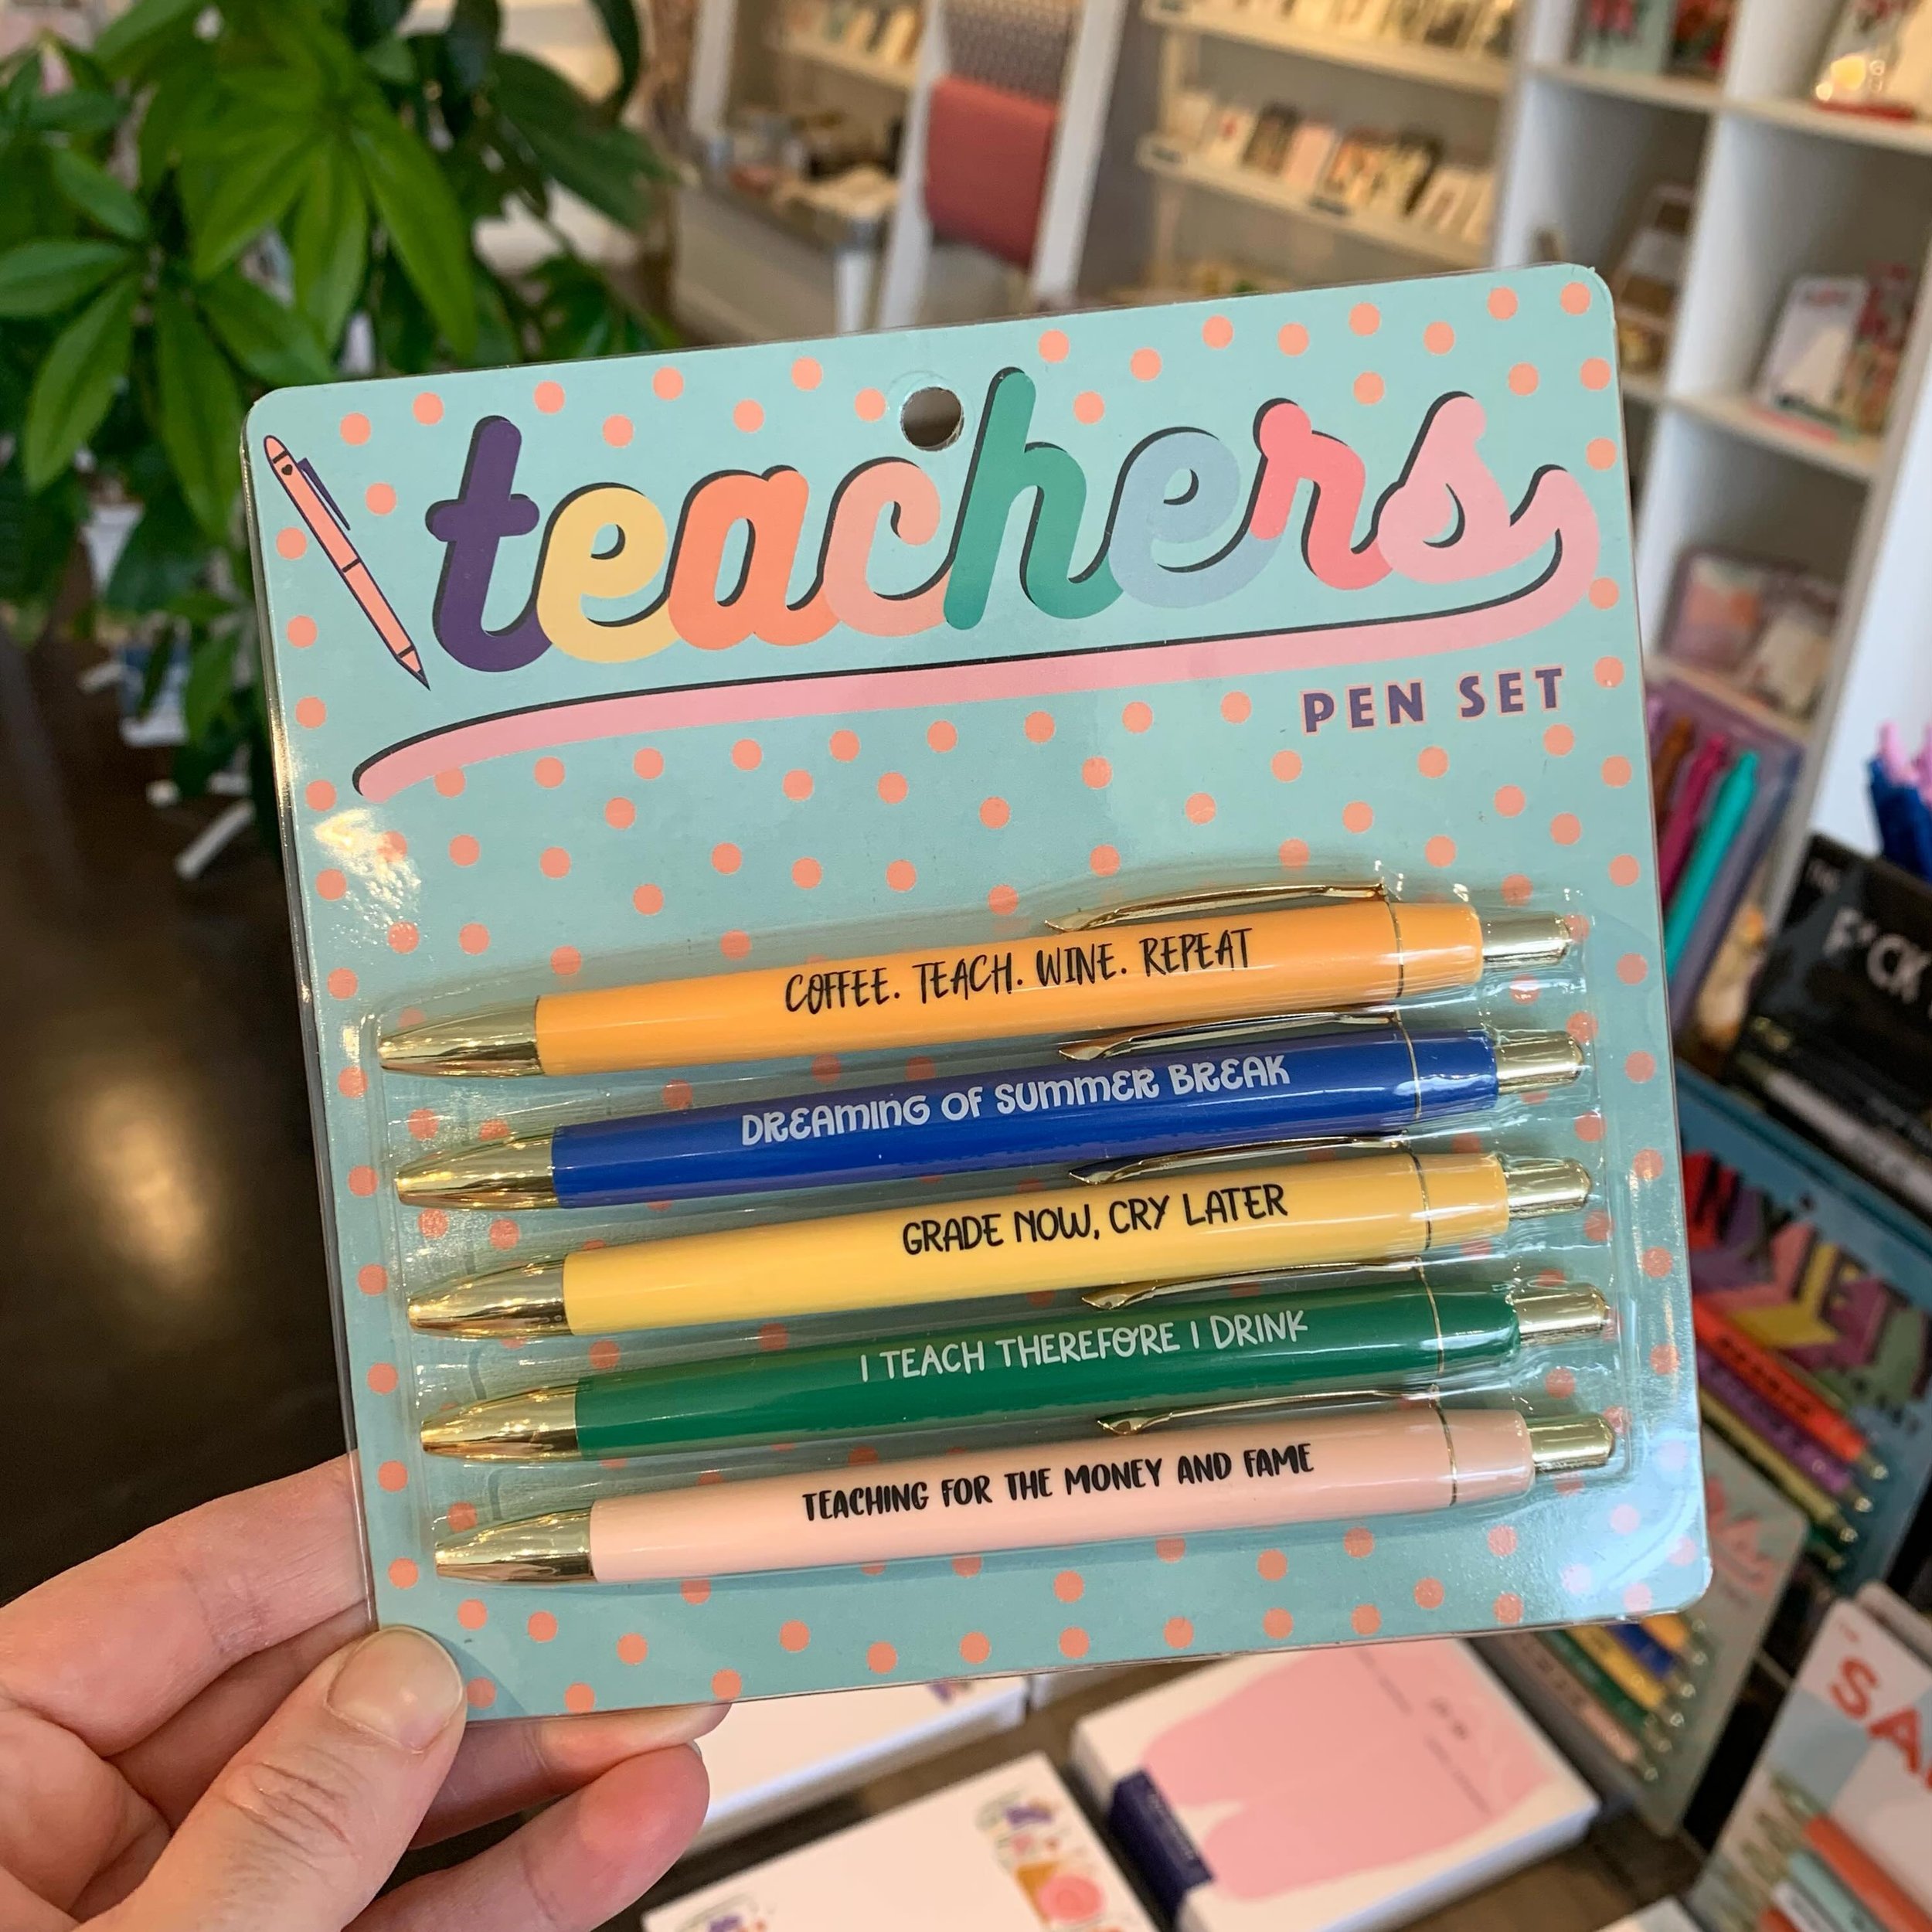 We have some great gift ideas for Teachers, like this pen set from Fun Club